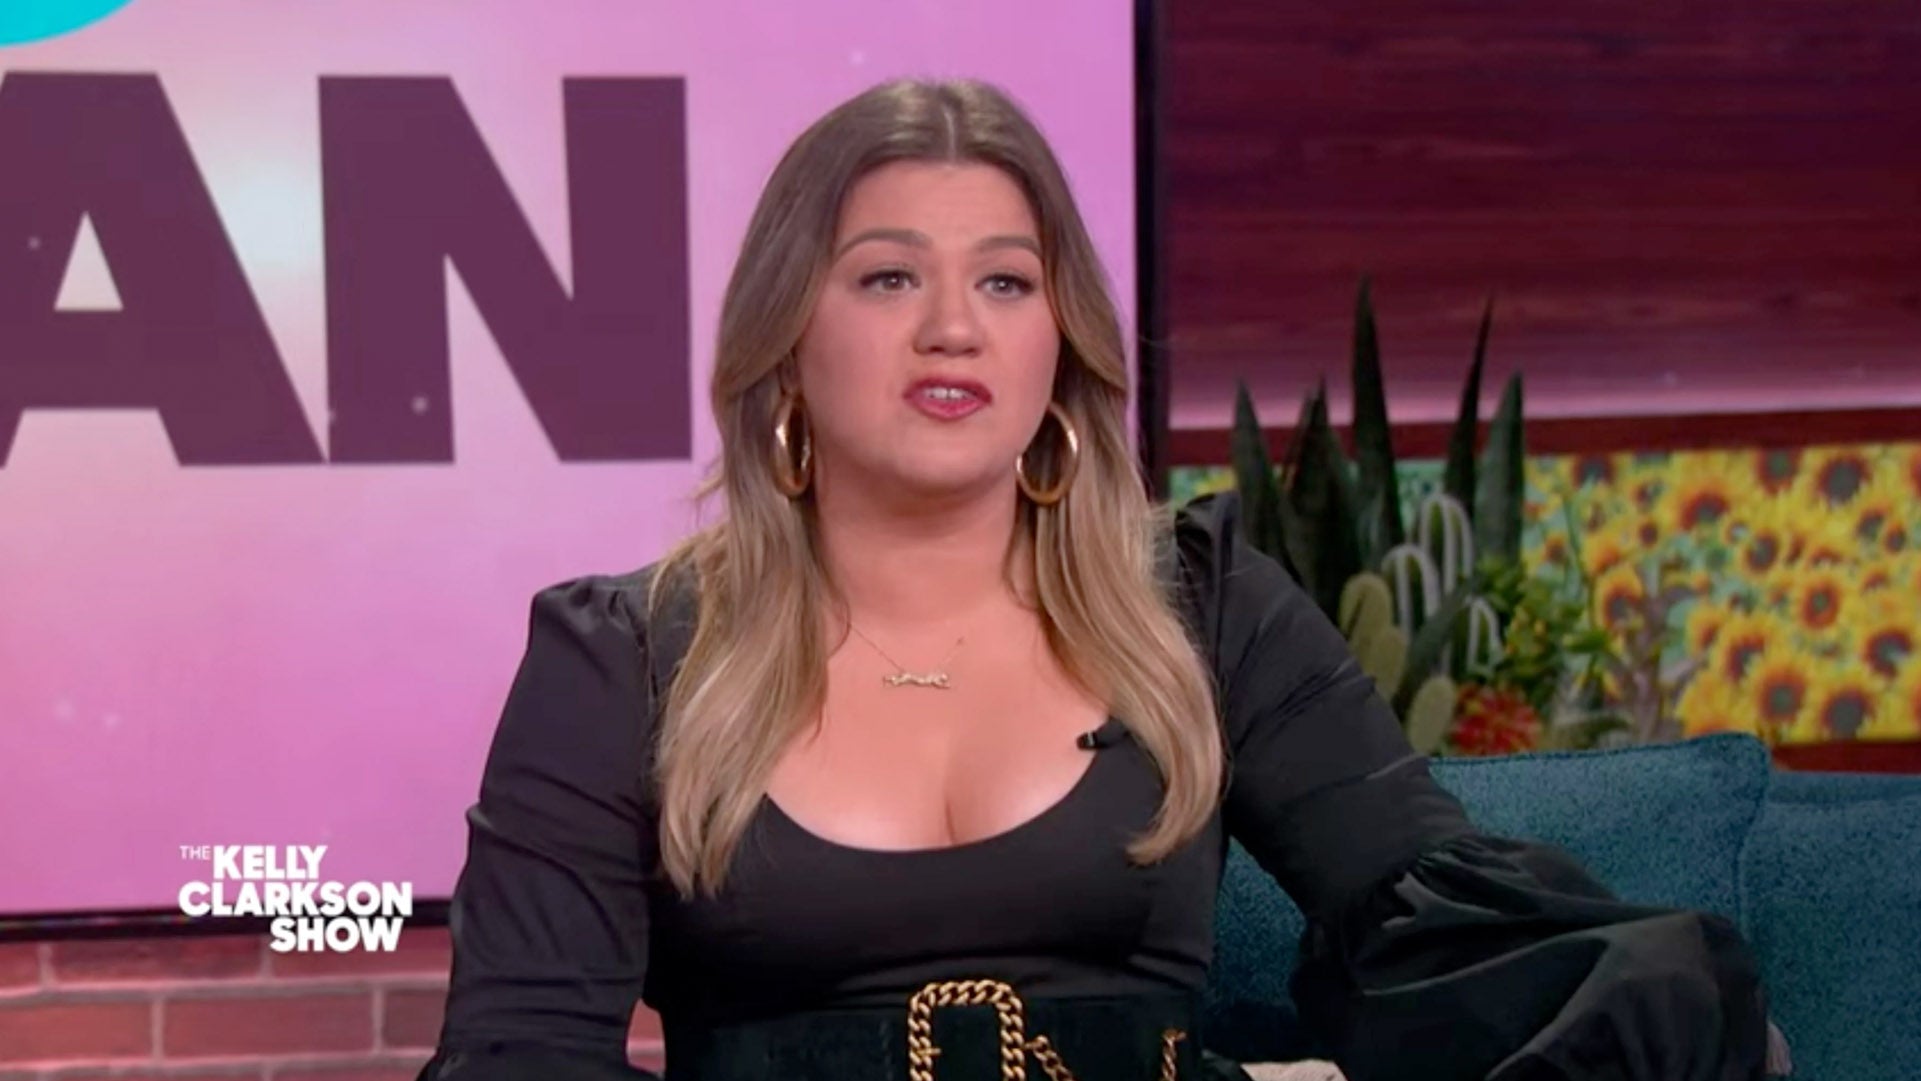 The Kelly Clarkson Show features Believe Diapers